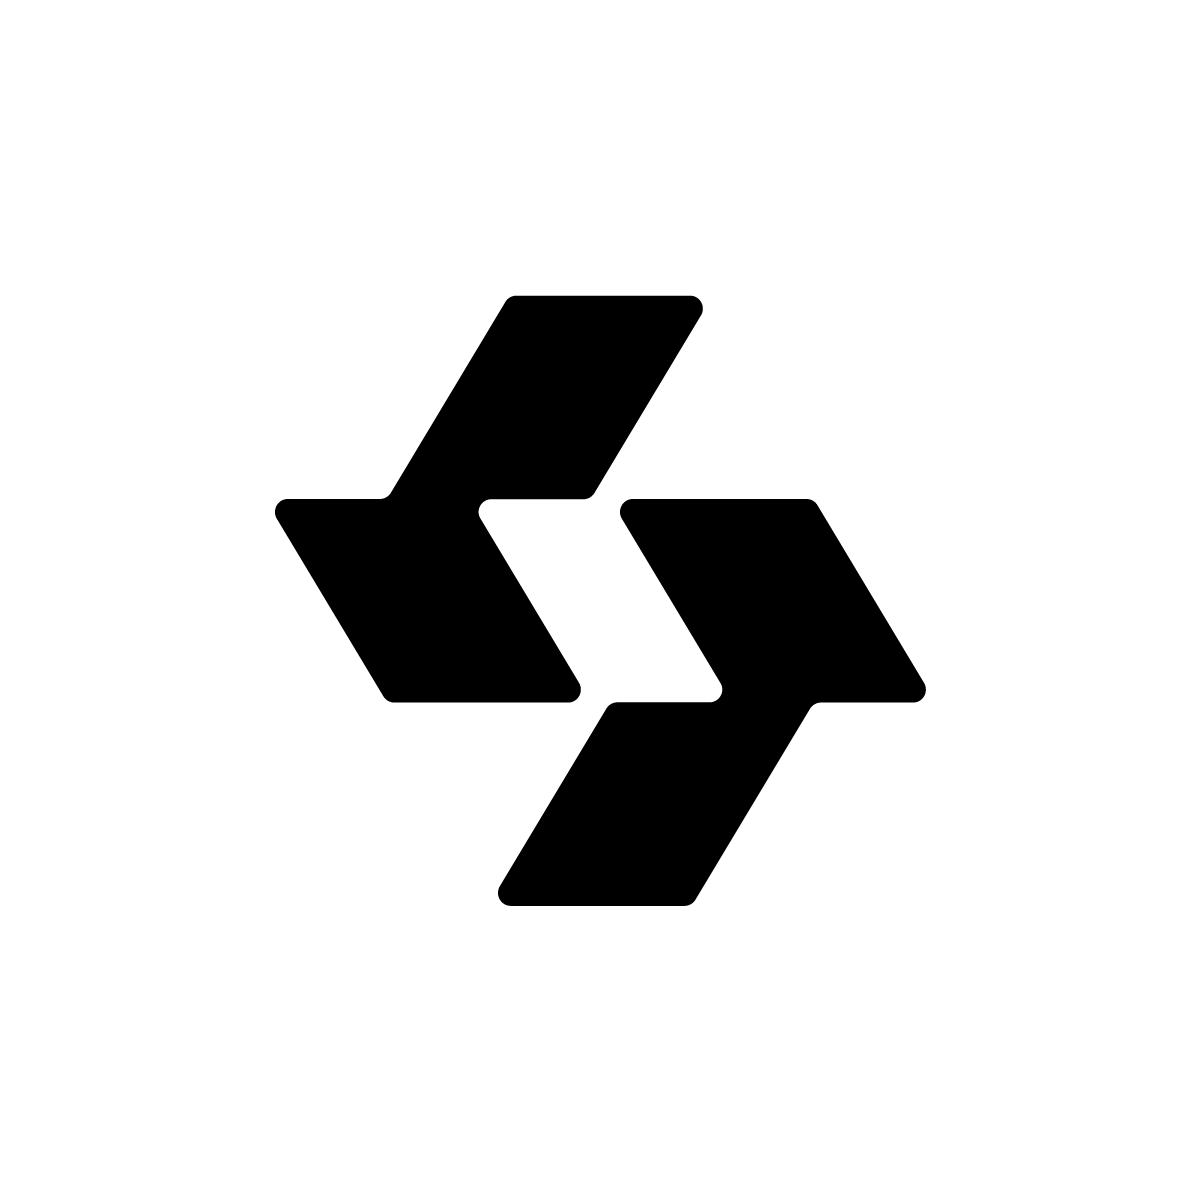 Abstract S Logo: Minimalistic S formed by four skewed rectangles